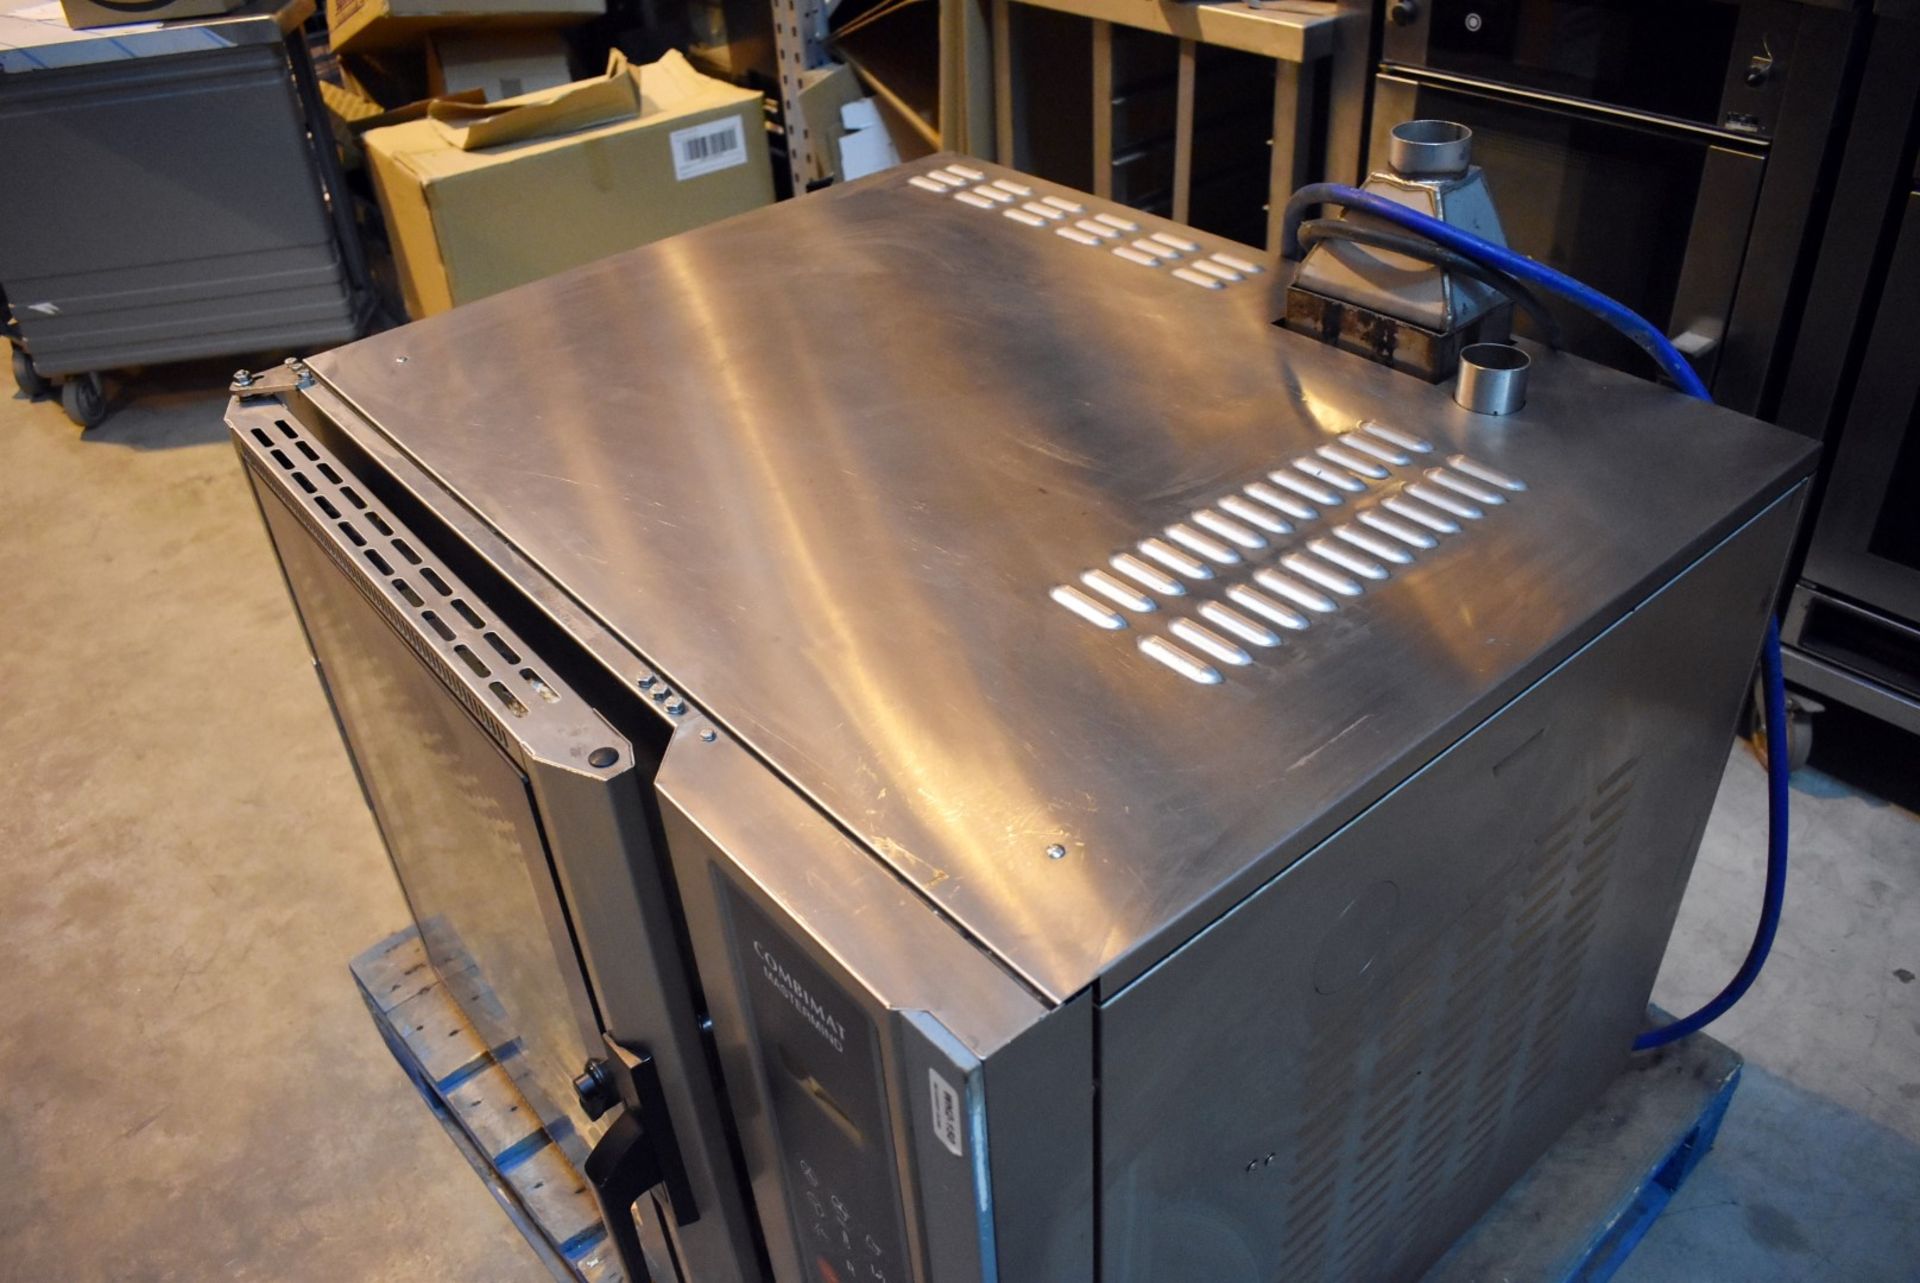 1 x Leventi Combimat mk3.1 Mastermind 6 Grid Combi Steam Oven - 3 Phase - Recently Removed From a - Image 3 of 11